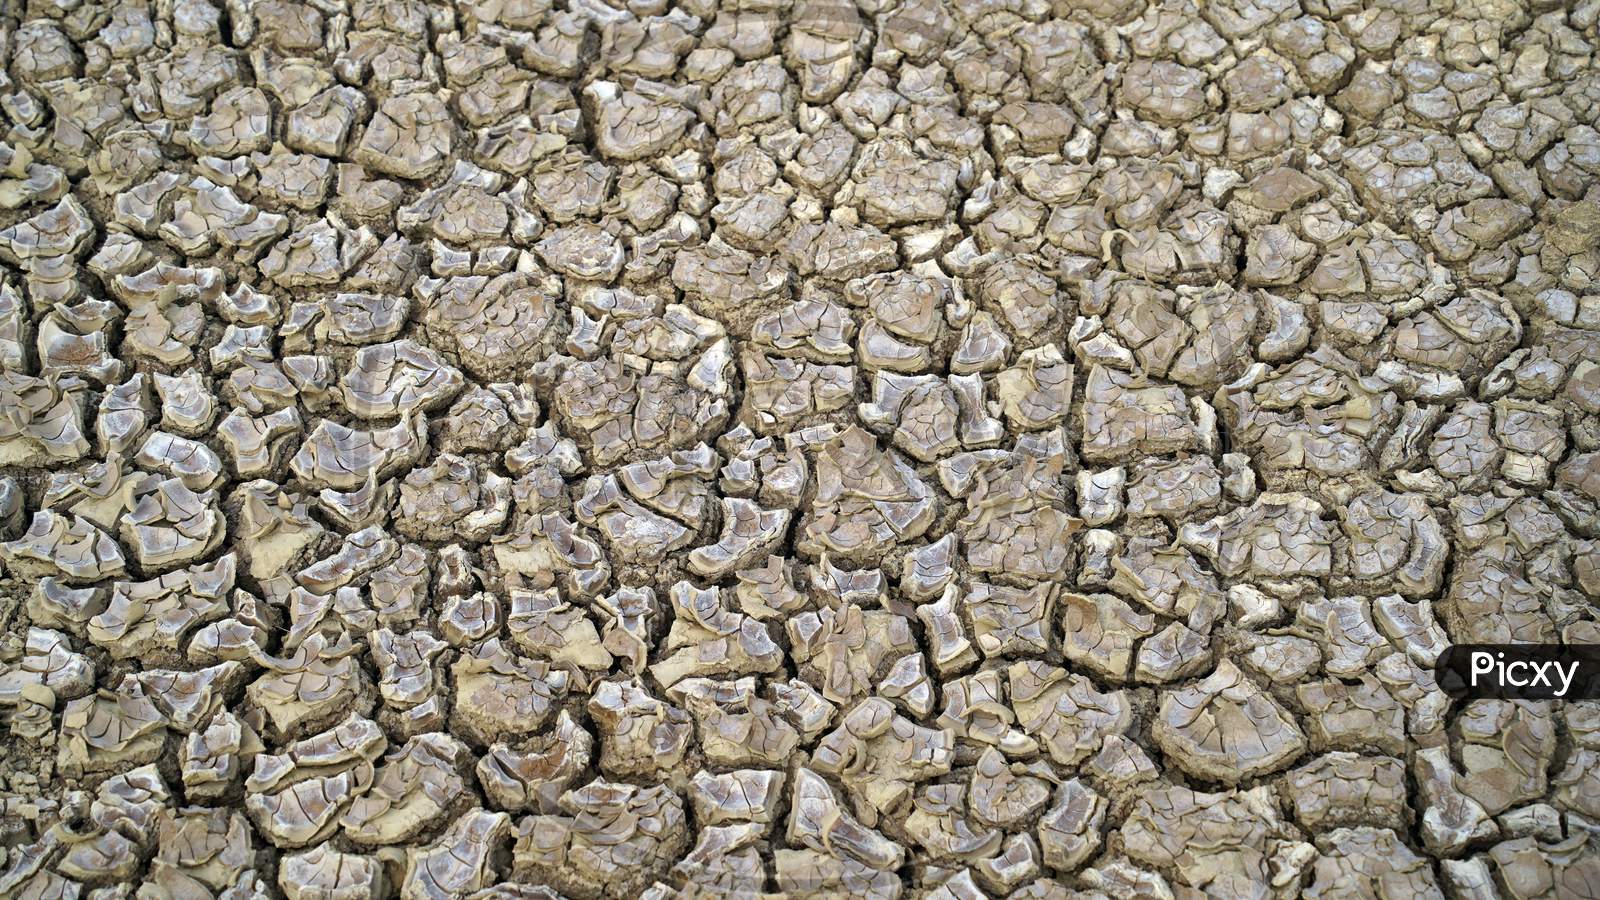 Desert. Aerial view of a beautiful cracks in the ground. texture, deep crack. Effects of heat and drought. effects of global warming. cracked desert landscape.